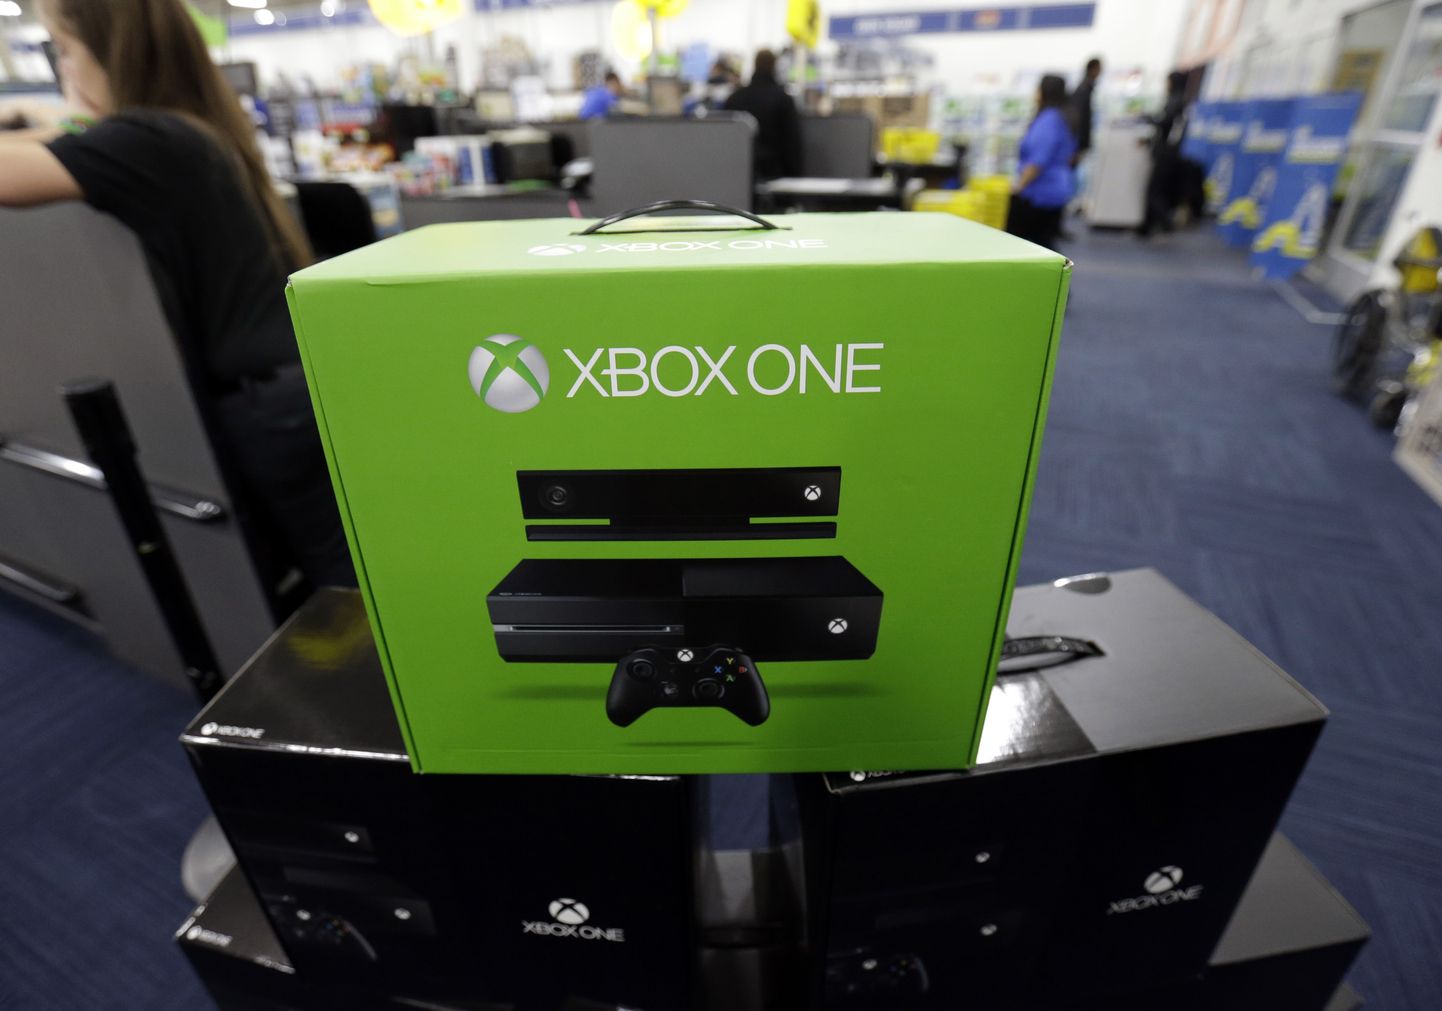 Xbox One display at a Best Buy store on Friday, Nov. 22, 2013., in Evanston, Ill. The Xbox One, which includes an updated Kinect motion sensor, cost $500. Microsoft is billing it as an all-in-one entertainment system rather than just a gaming console. (AP Photo/Nam Y. Huh) / TT / kod 436